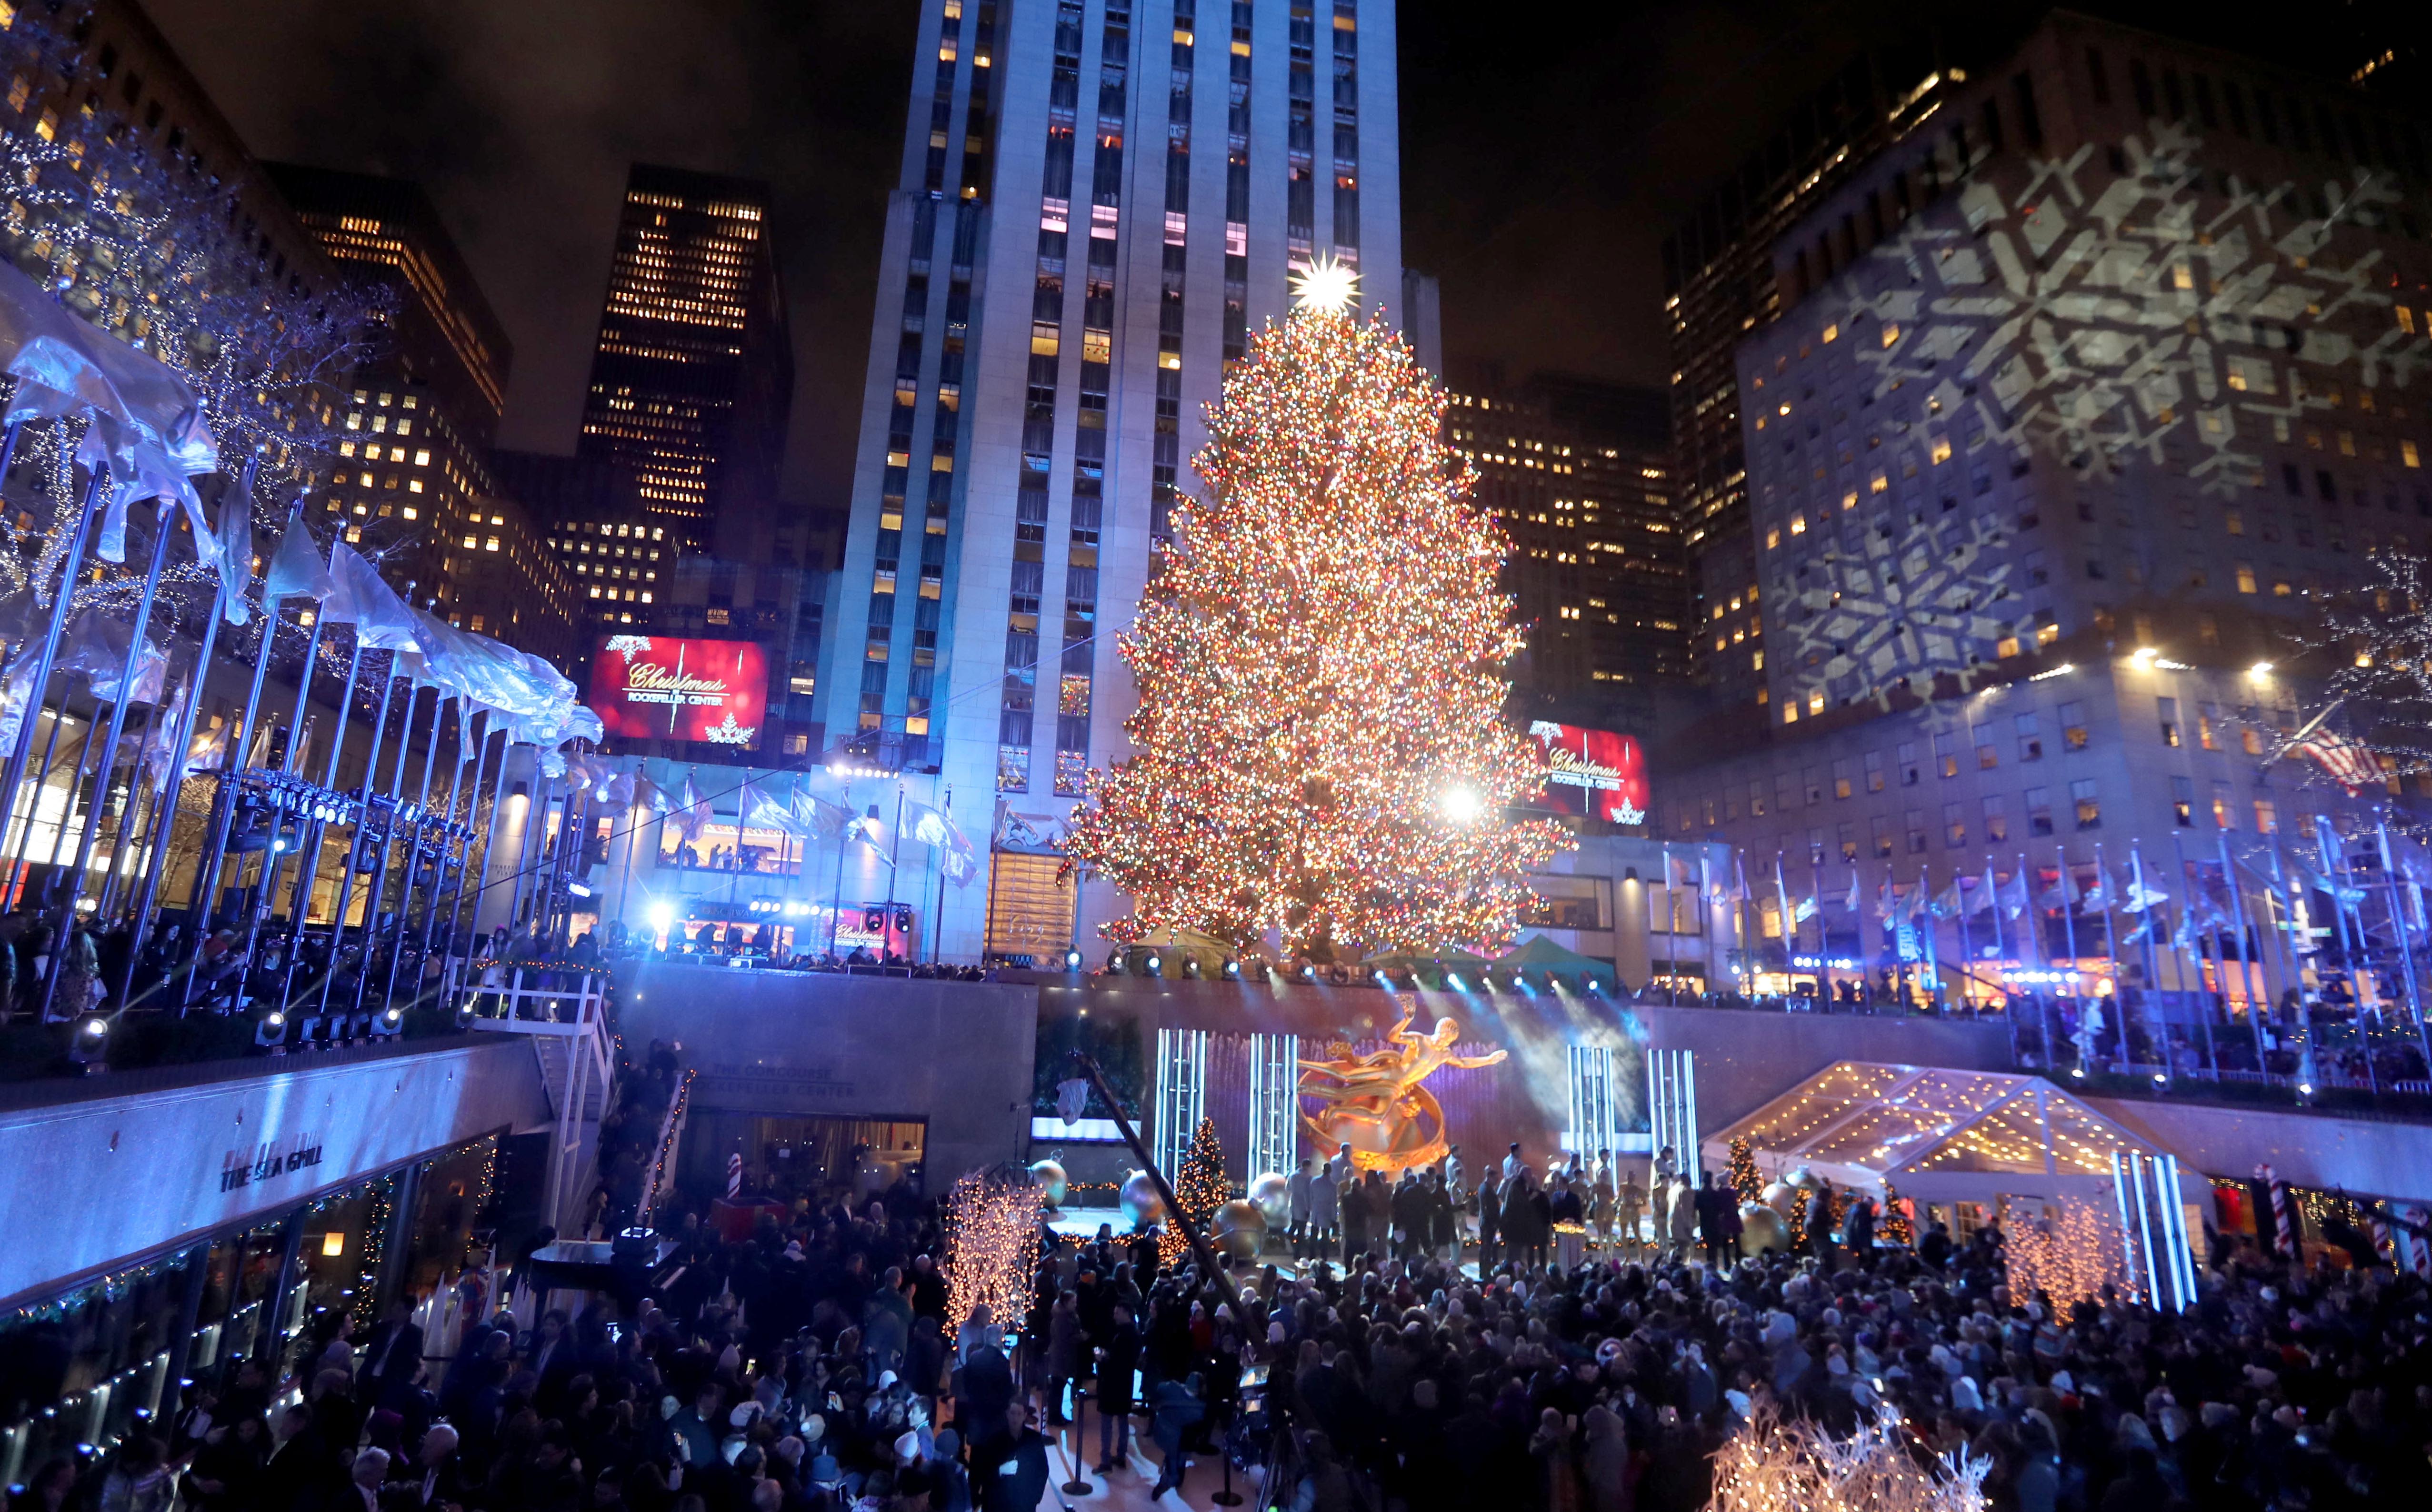 How Tall Is The Christmas Tree In Rockefeller Center 2020 | Best New 2020